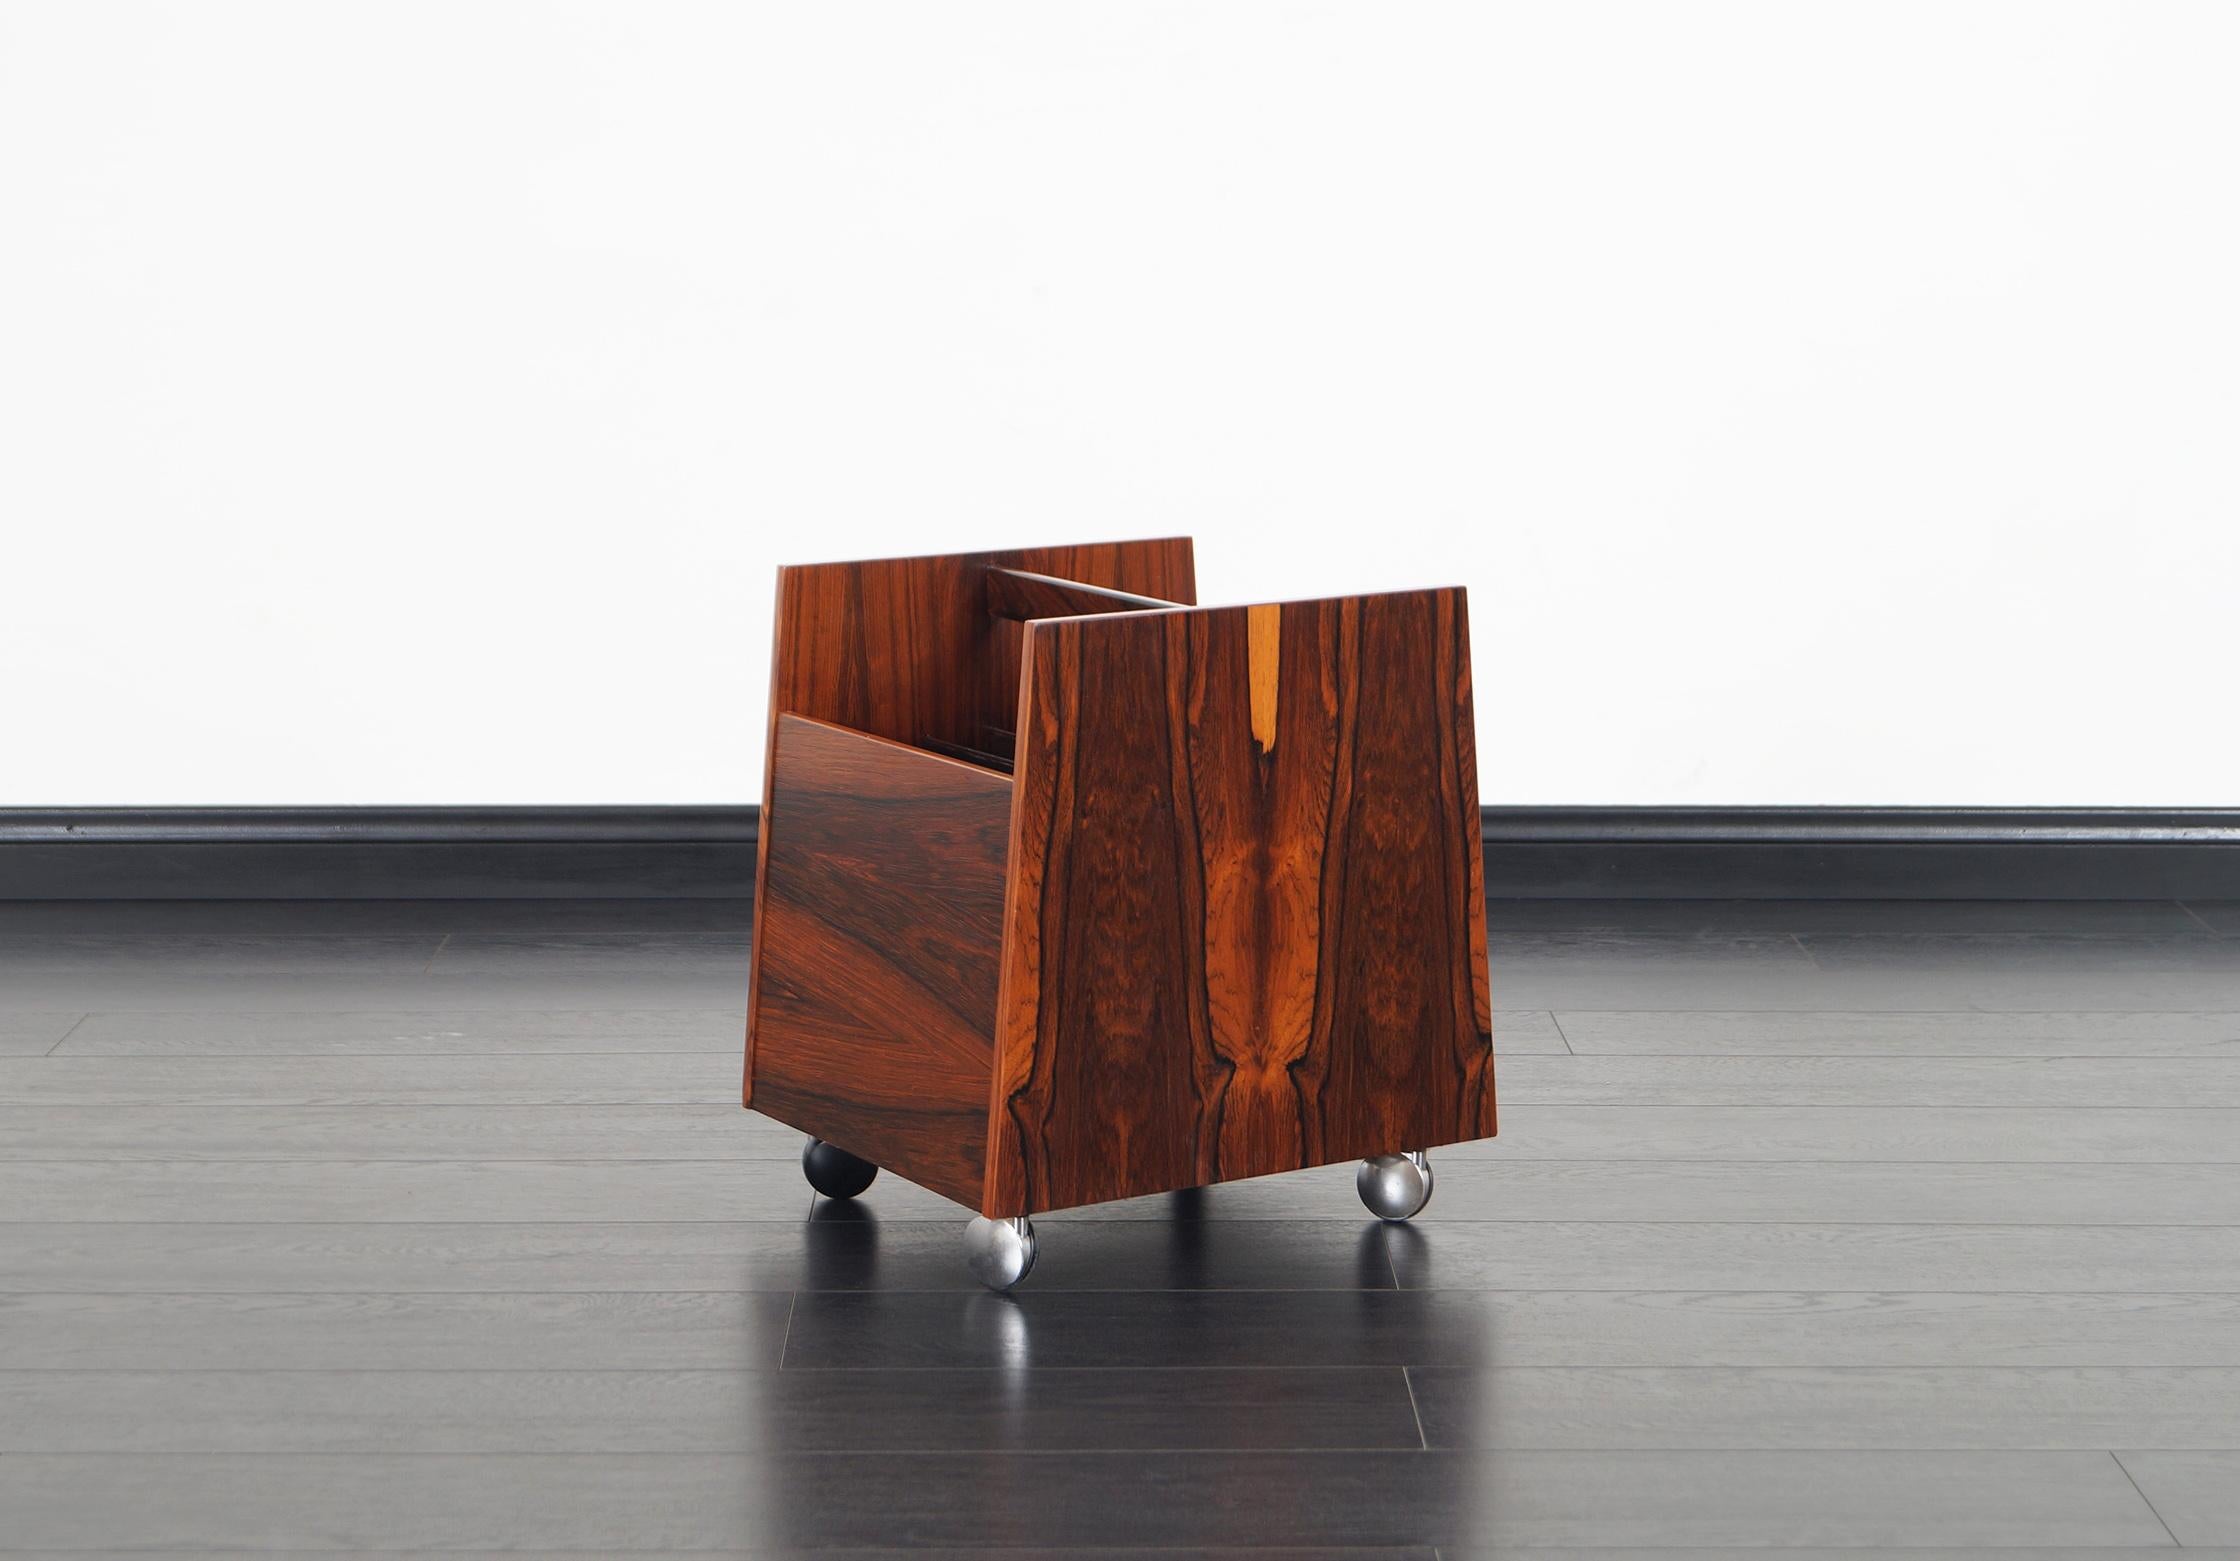 Danish Brazilian rosewood magazine or record stand designed by Rolf Hesland and produced by Bruksbo in Norway, circa 1960s.